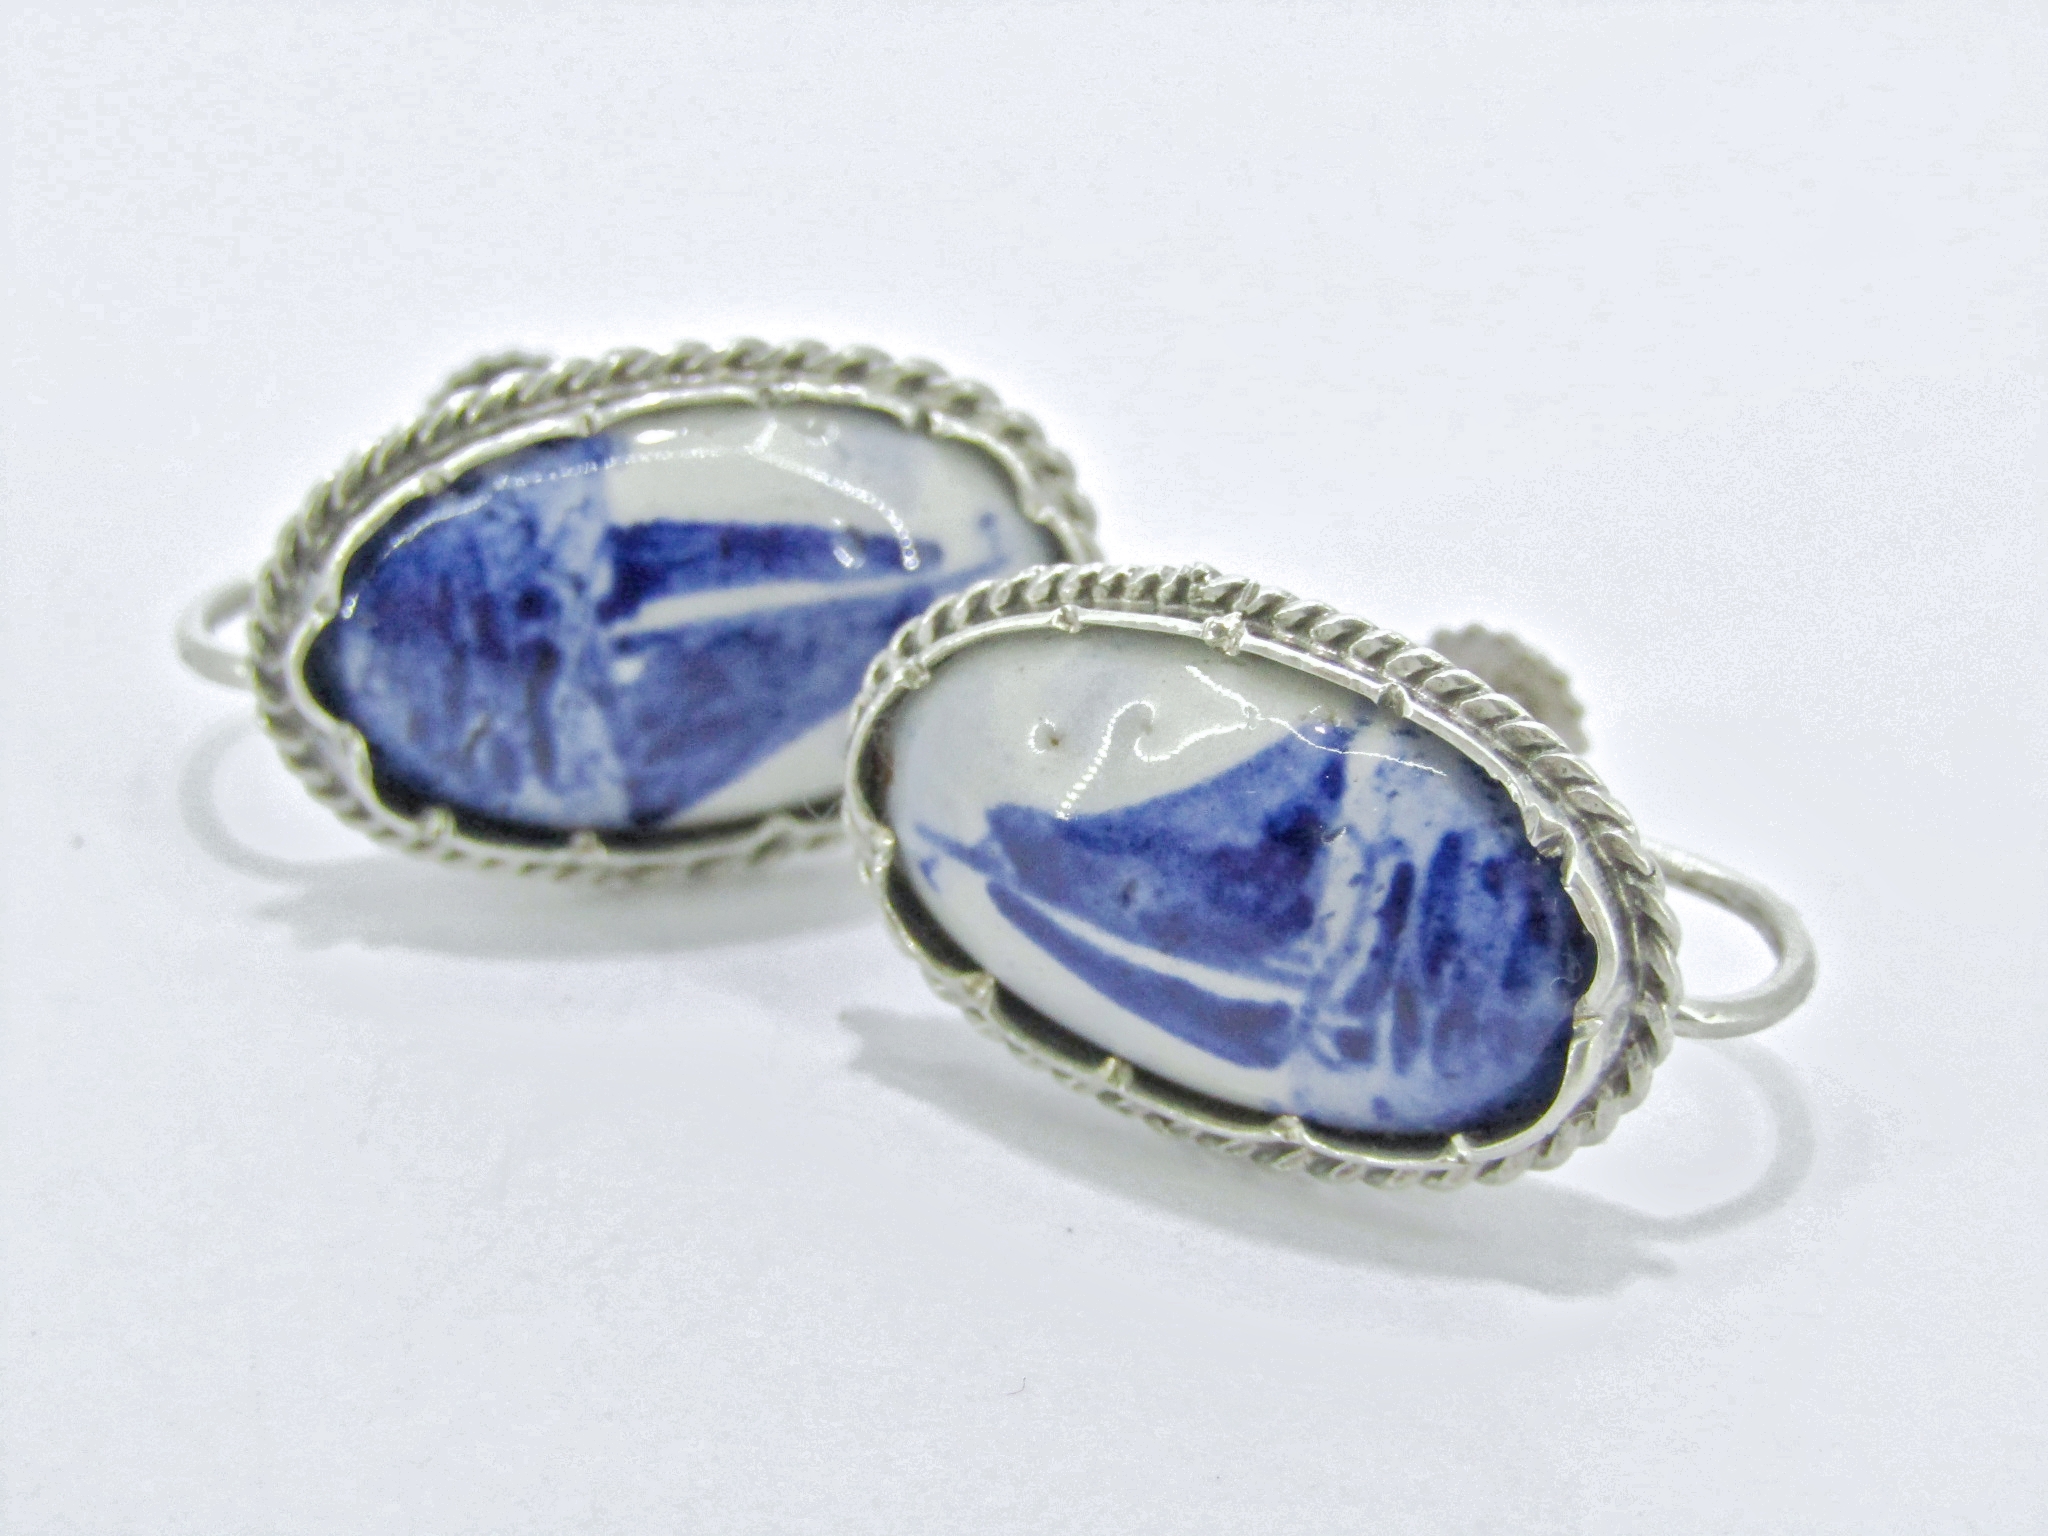 A Gorgeous Pair of Vintage Delft Screw Back Earrings in Sterling Silver